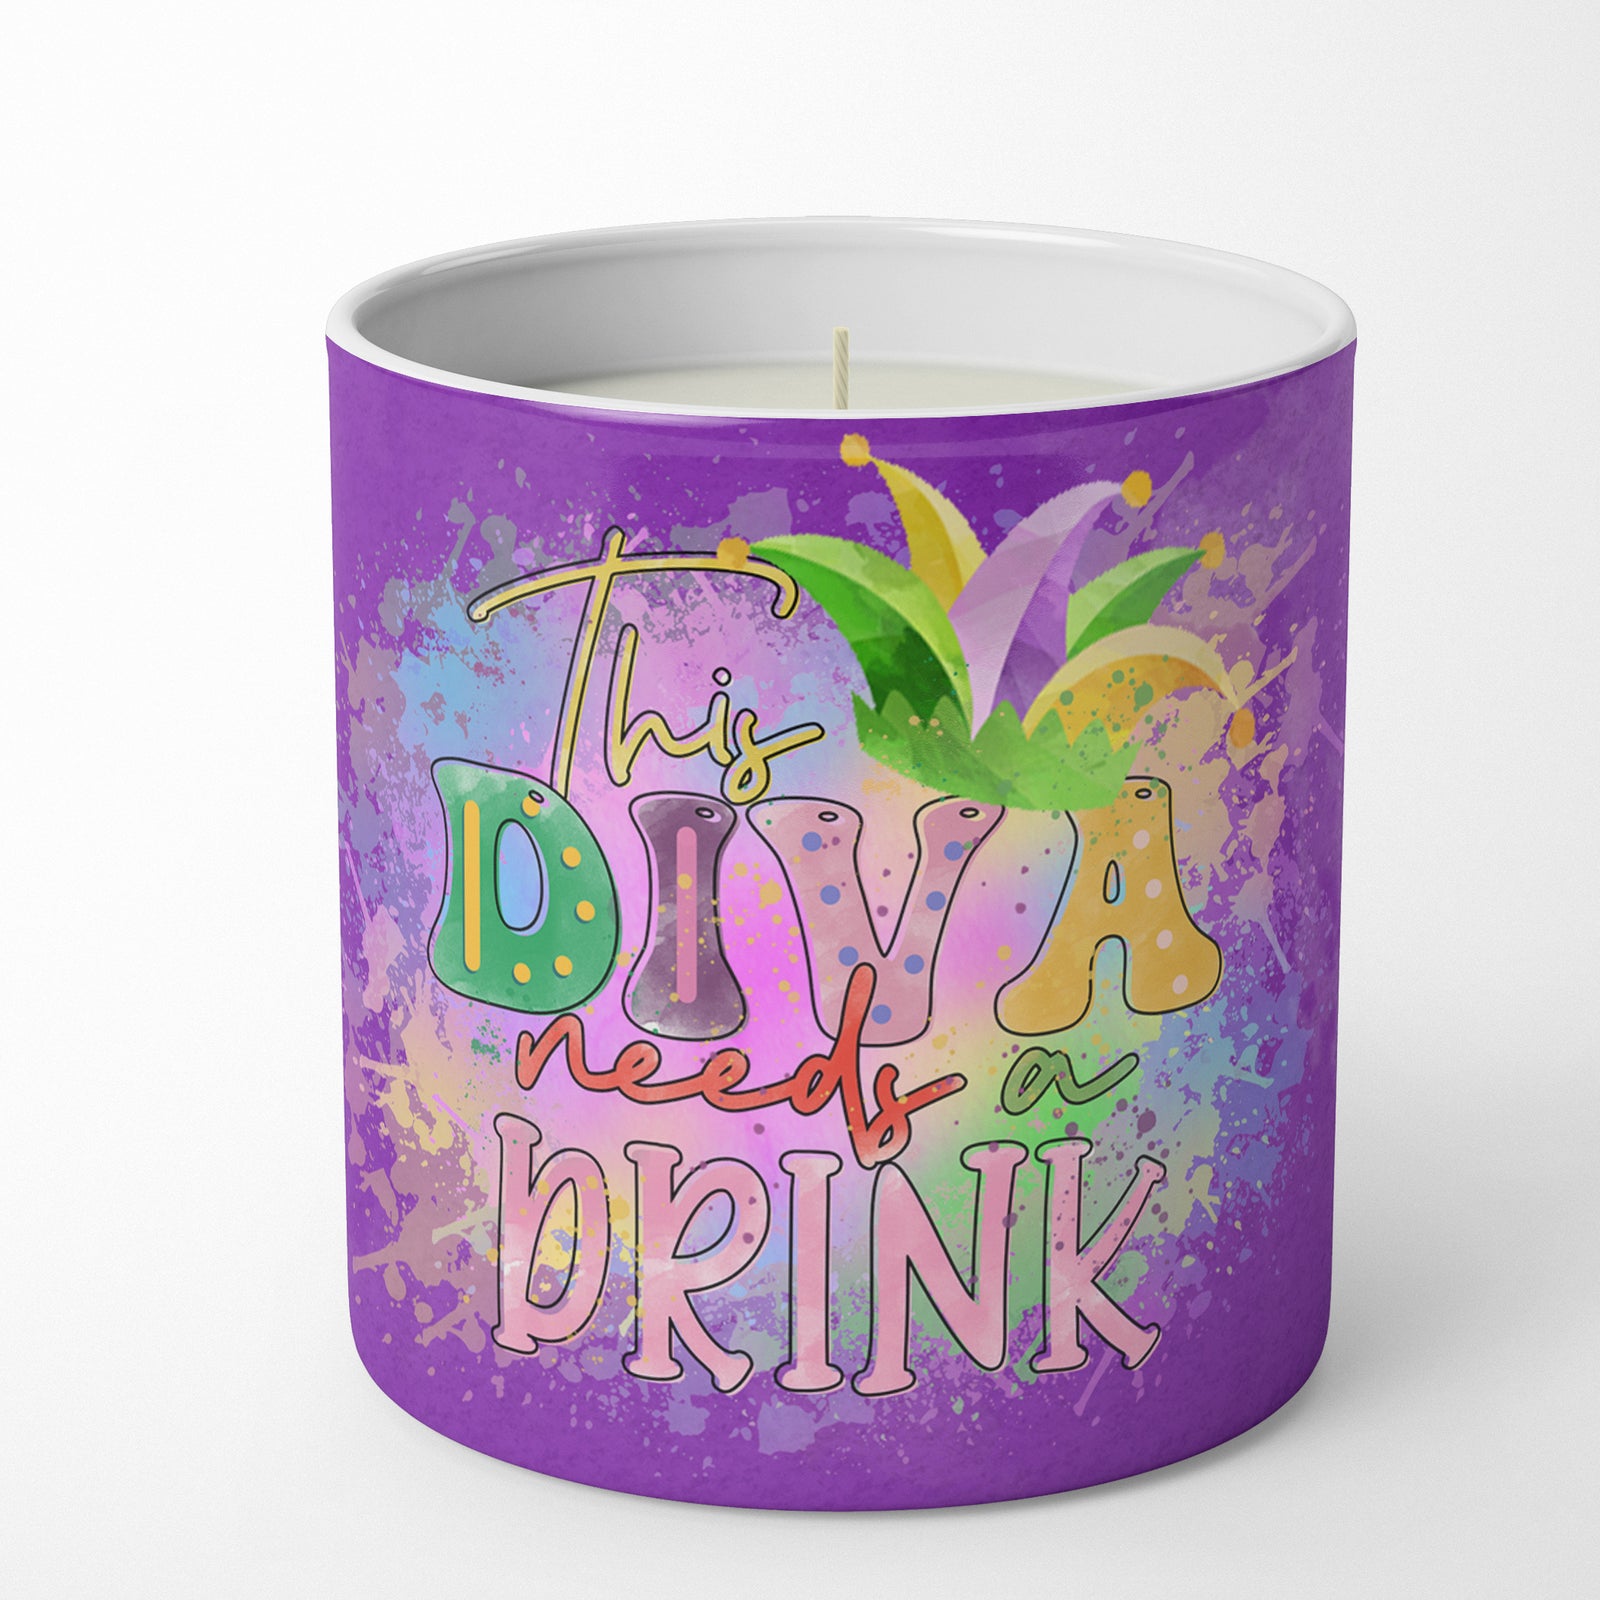 Buy this This Diva needs a Drink Mardi Gras 10 oz Decorative Soy Candle